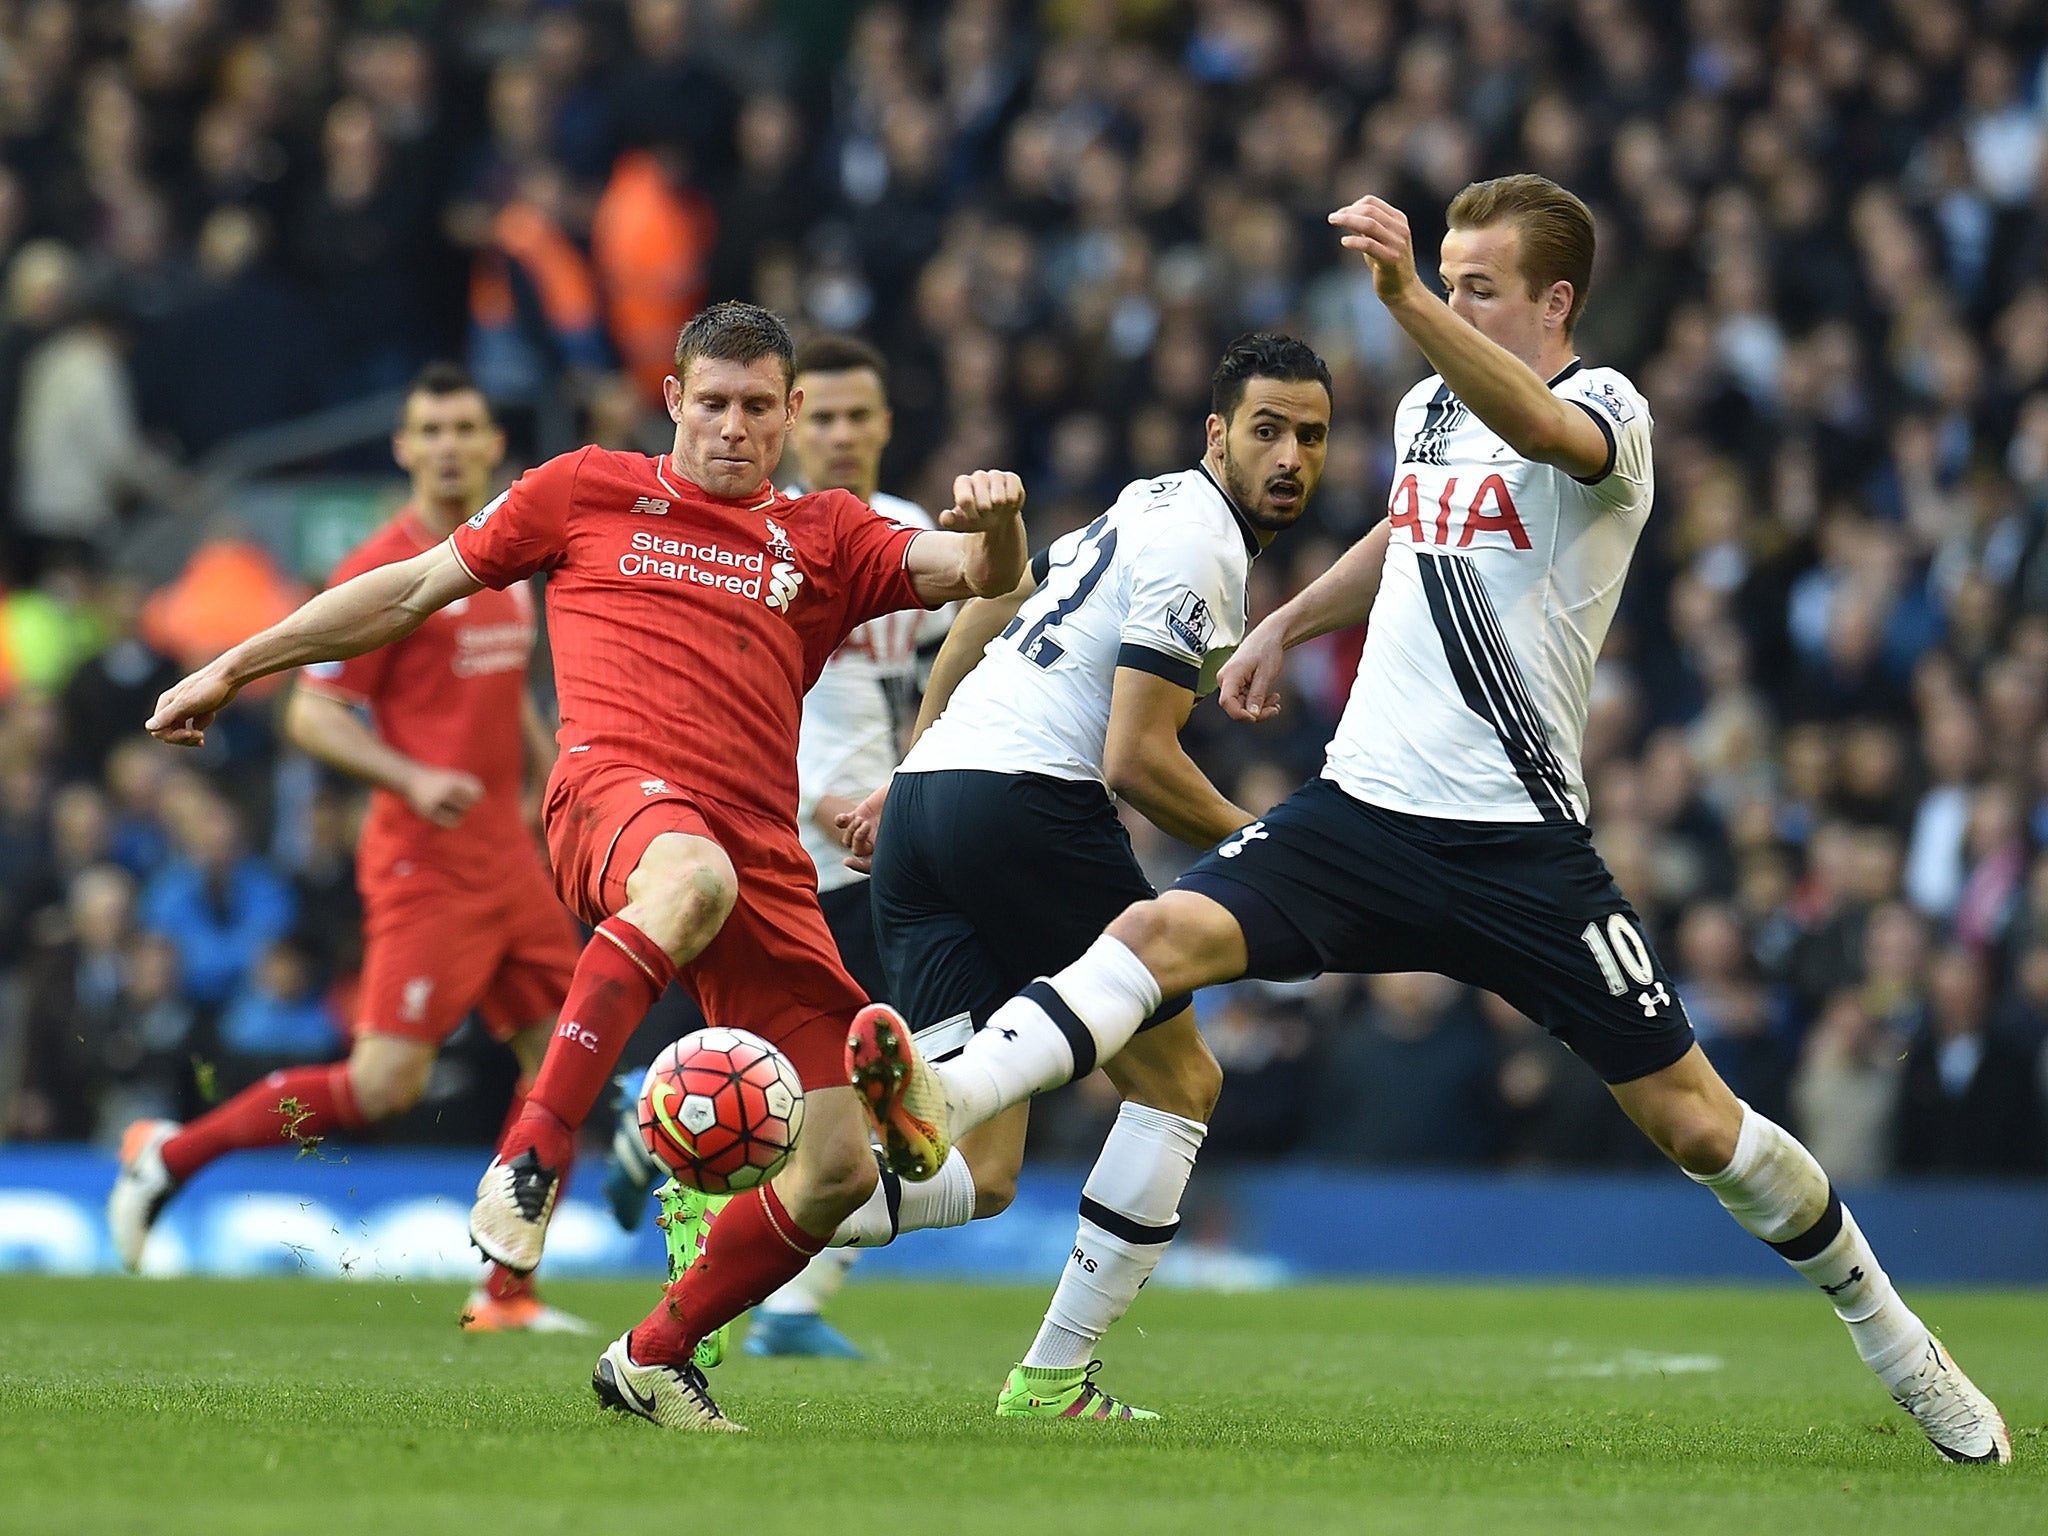 James Milner competes with Harry Kane for the ball